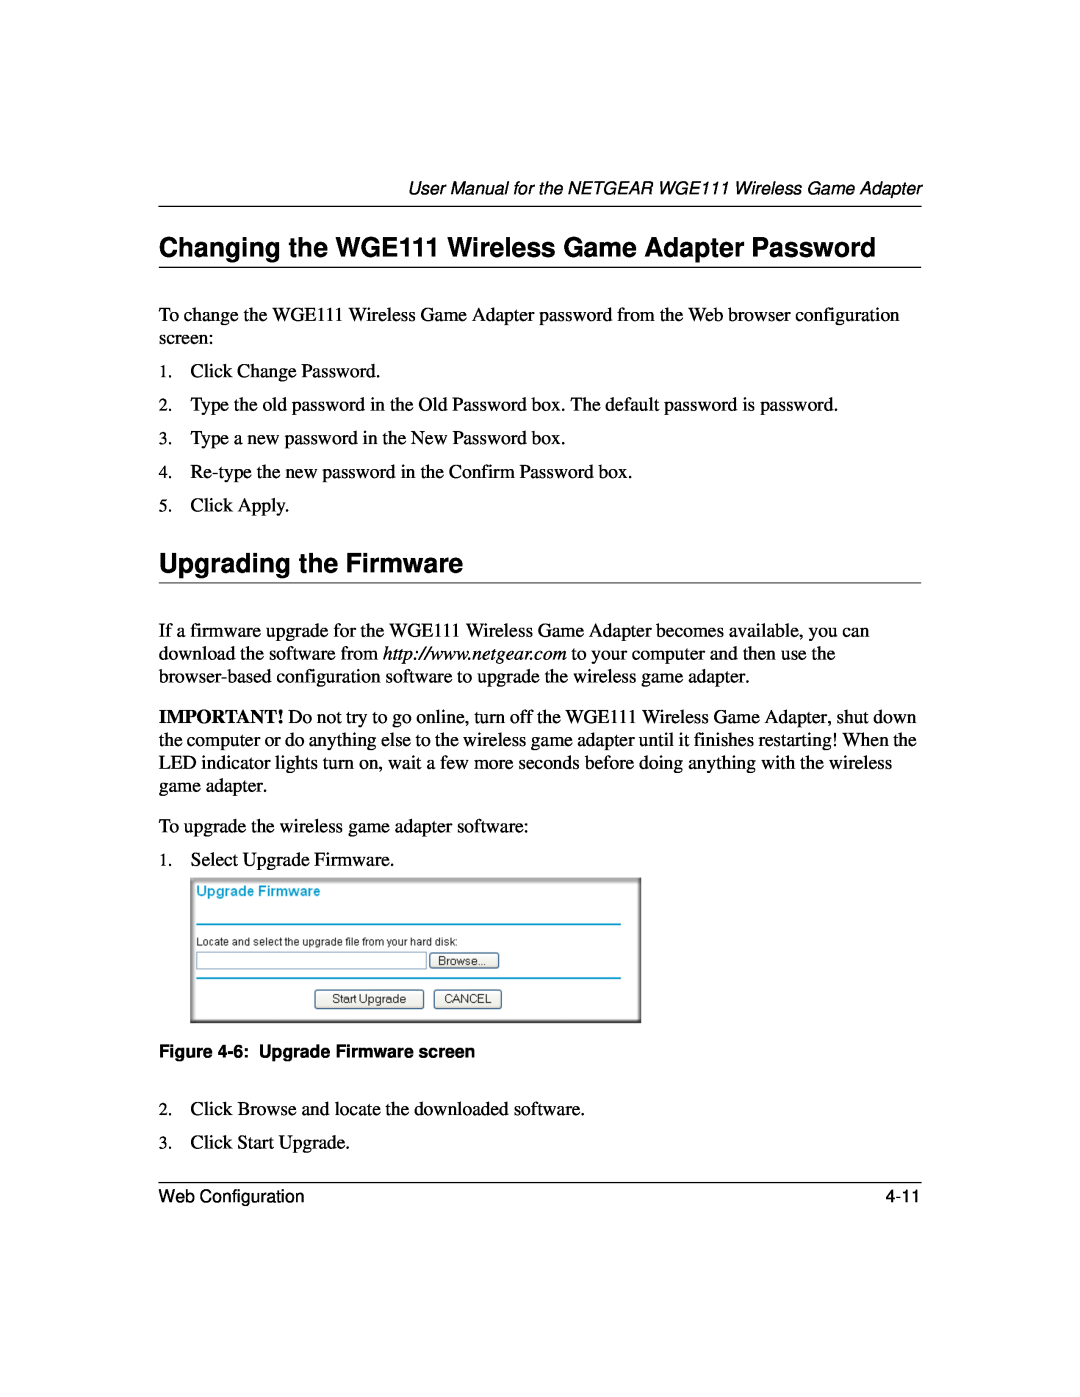 NETGEAR user manual Changing the WGE111 Wireless Game Adapter Password, Upgrading the Firmware 